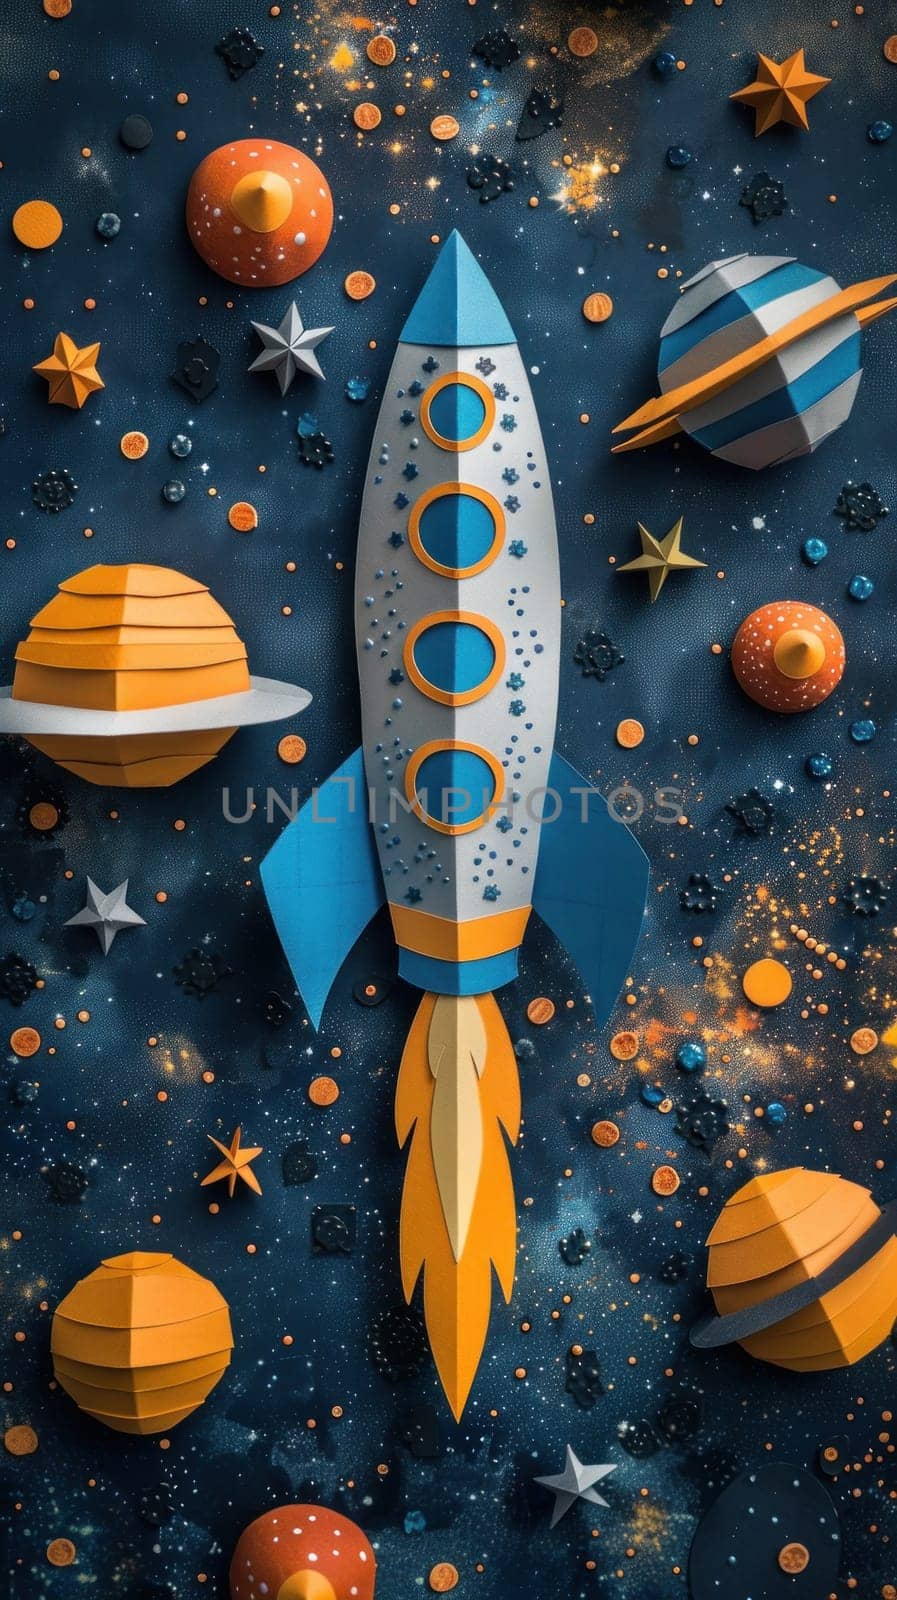 A paper rocket is flying through space with planets and stars surrounding it by golfmerrymaker